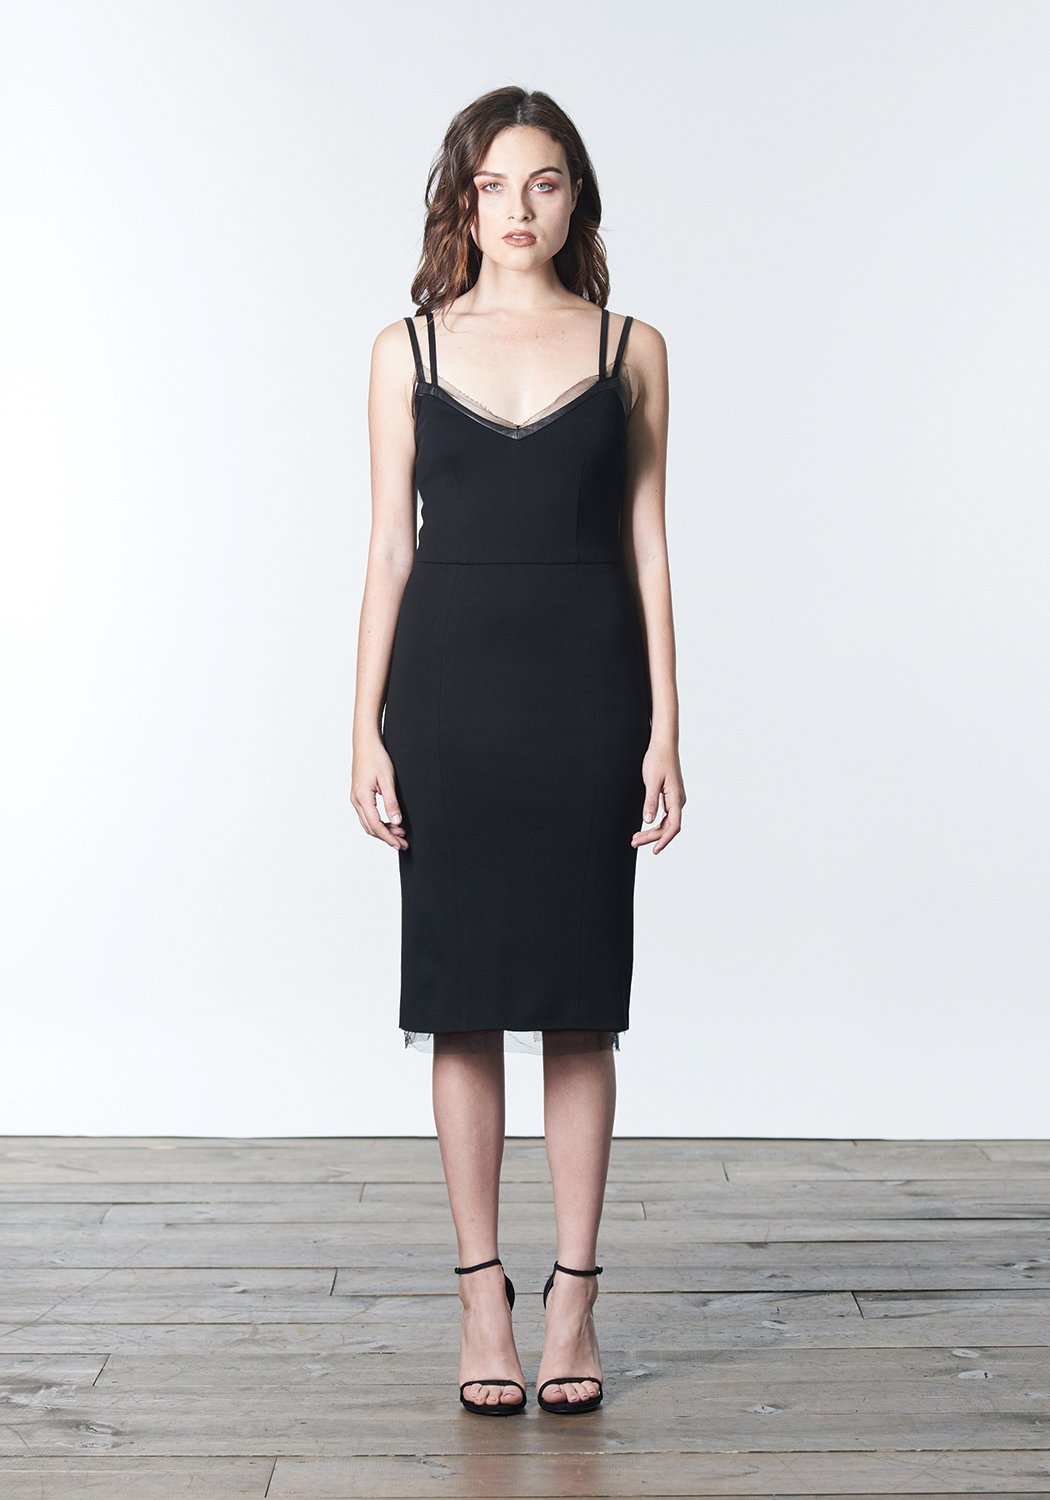 Fall, Autumn, Winter cocktail "little black dress" made of wool tencel with leather and silk mesh trim.